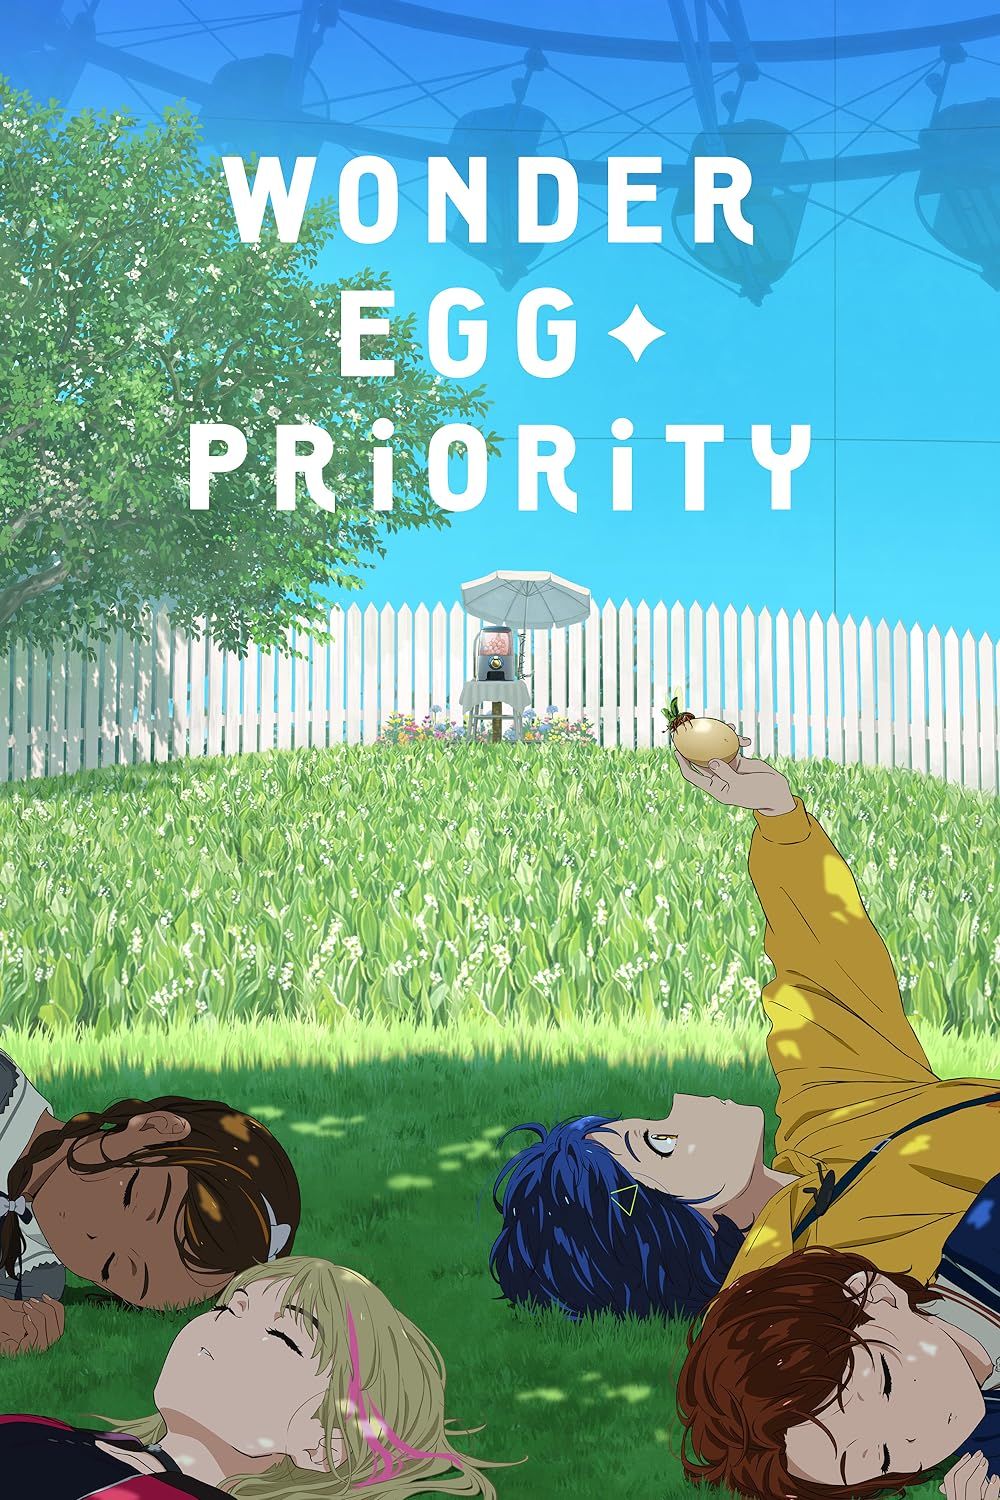 Poster of Wonder Egg Priority with the main characters sleeping on the grass